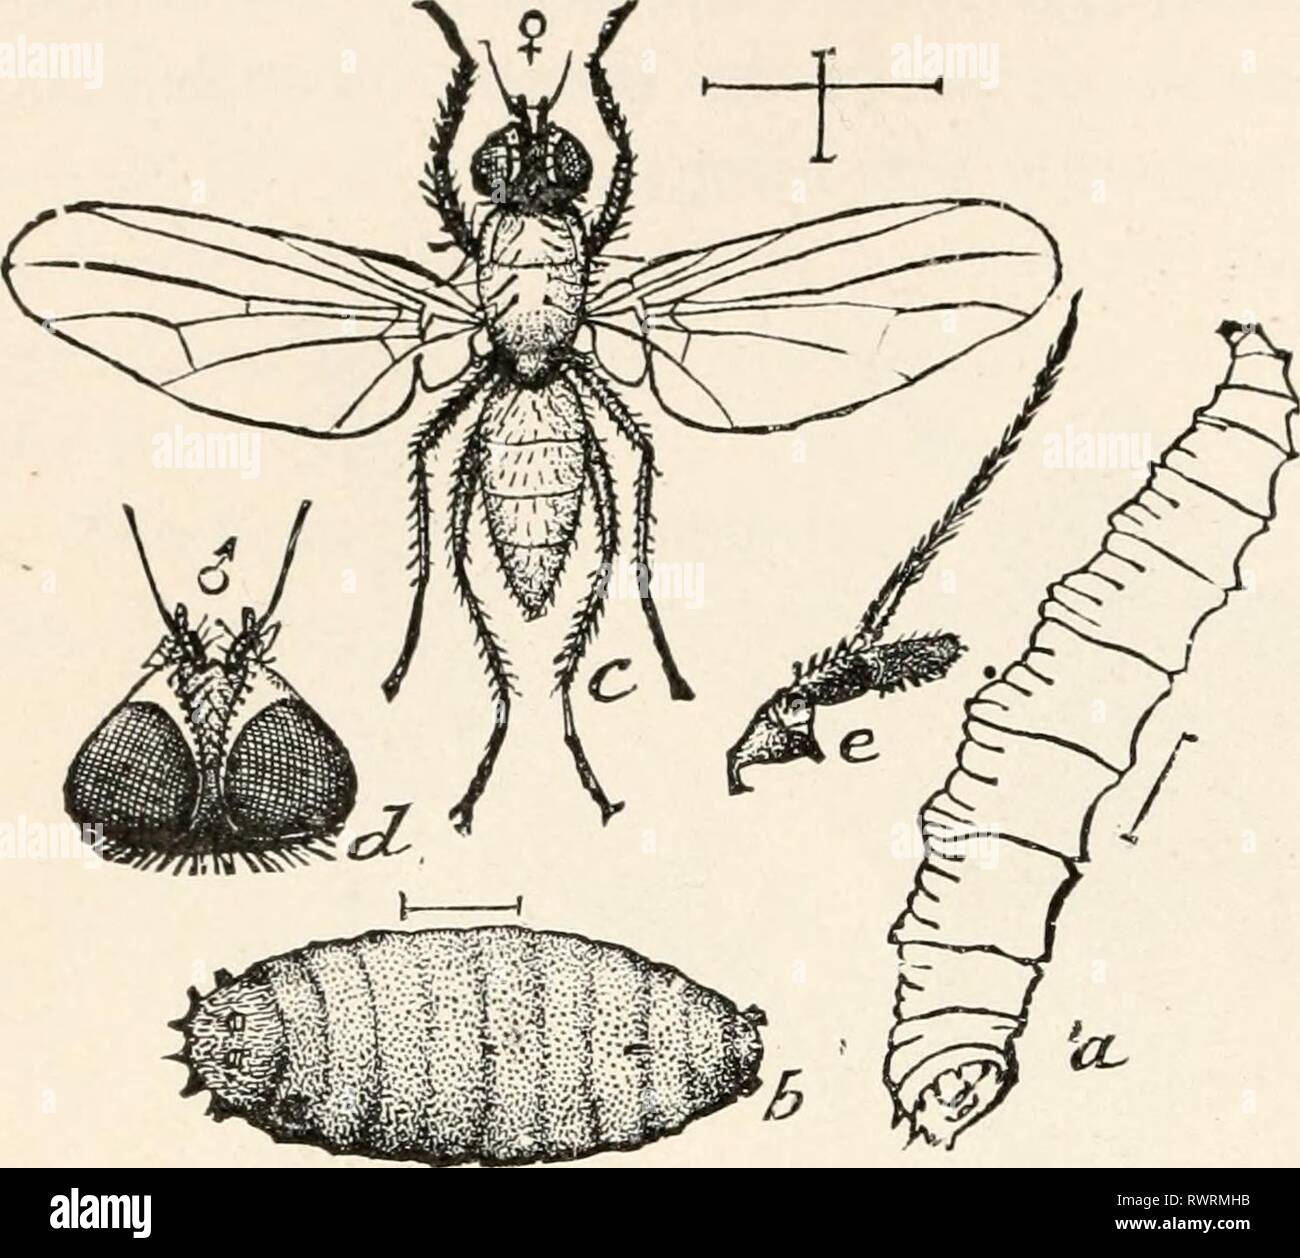 Elementary entomology ([c1912]) Elementary entomology elementaryentomo00sand Year: [c1912]  238 ELEMENTARY ENTOMOLOGY The tachina-flies are among our most beneficial insects, their white eggs being commonly found on the necks of caterpillars and grasshoppers, the flies appearing in large num- bers whenever there is an outbreak of such caterpillars as the army- worm. Root-maggot flies (Anthomytidae) are an- other group of trouble- some flies belonging to this series, many of whose larvae are serious pests of the roots of vegeta- bles. The flies somewhat resemble house-flies, but are smaller and Stock Photo